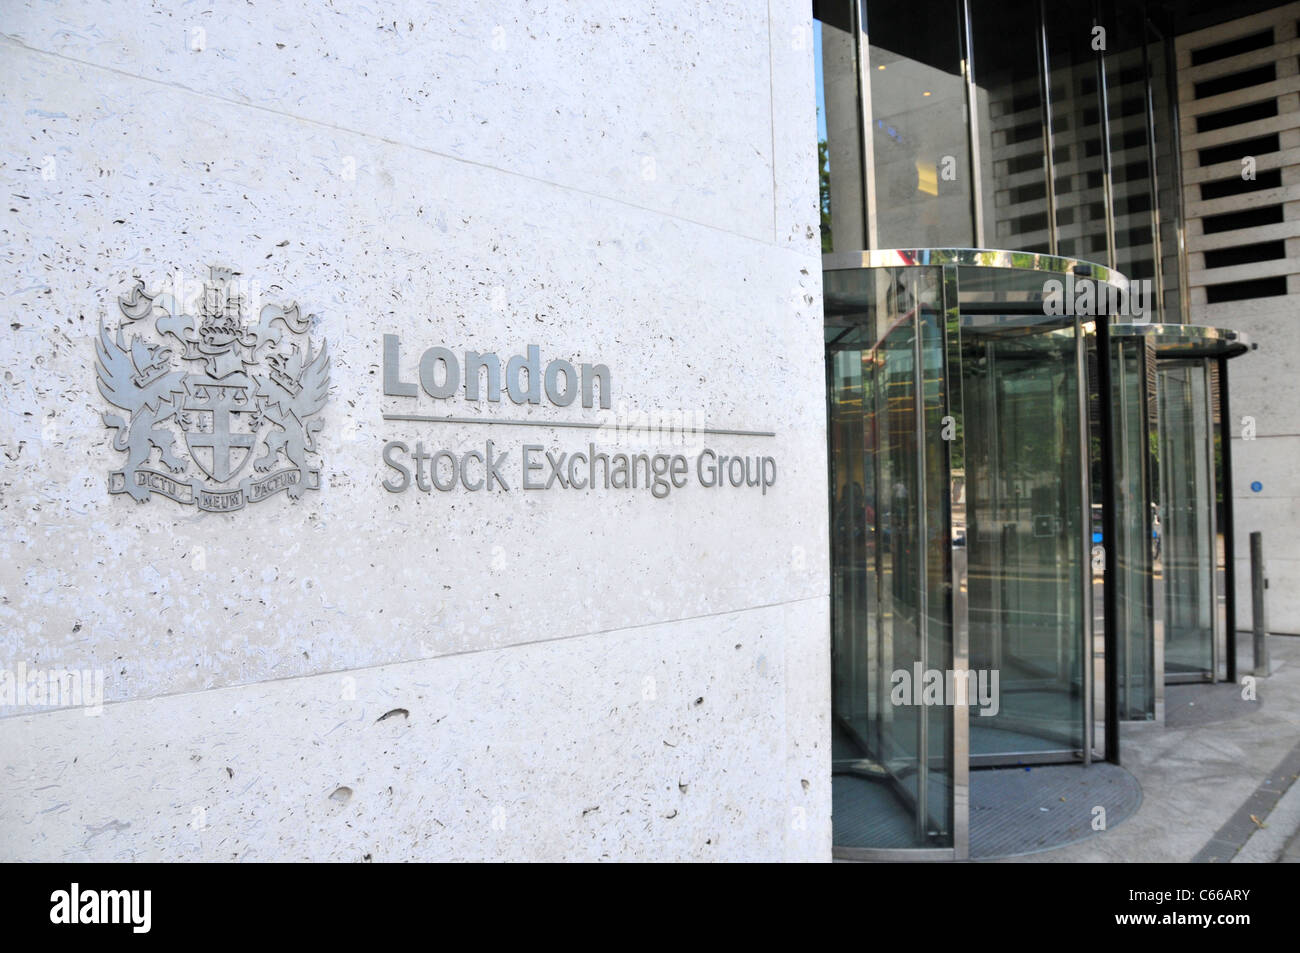 Paternoster Square London Stock Exchange actions stocks Banque D'Images